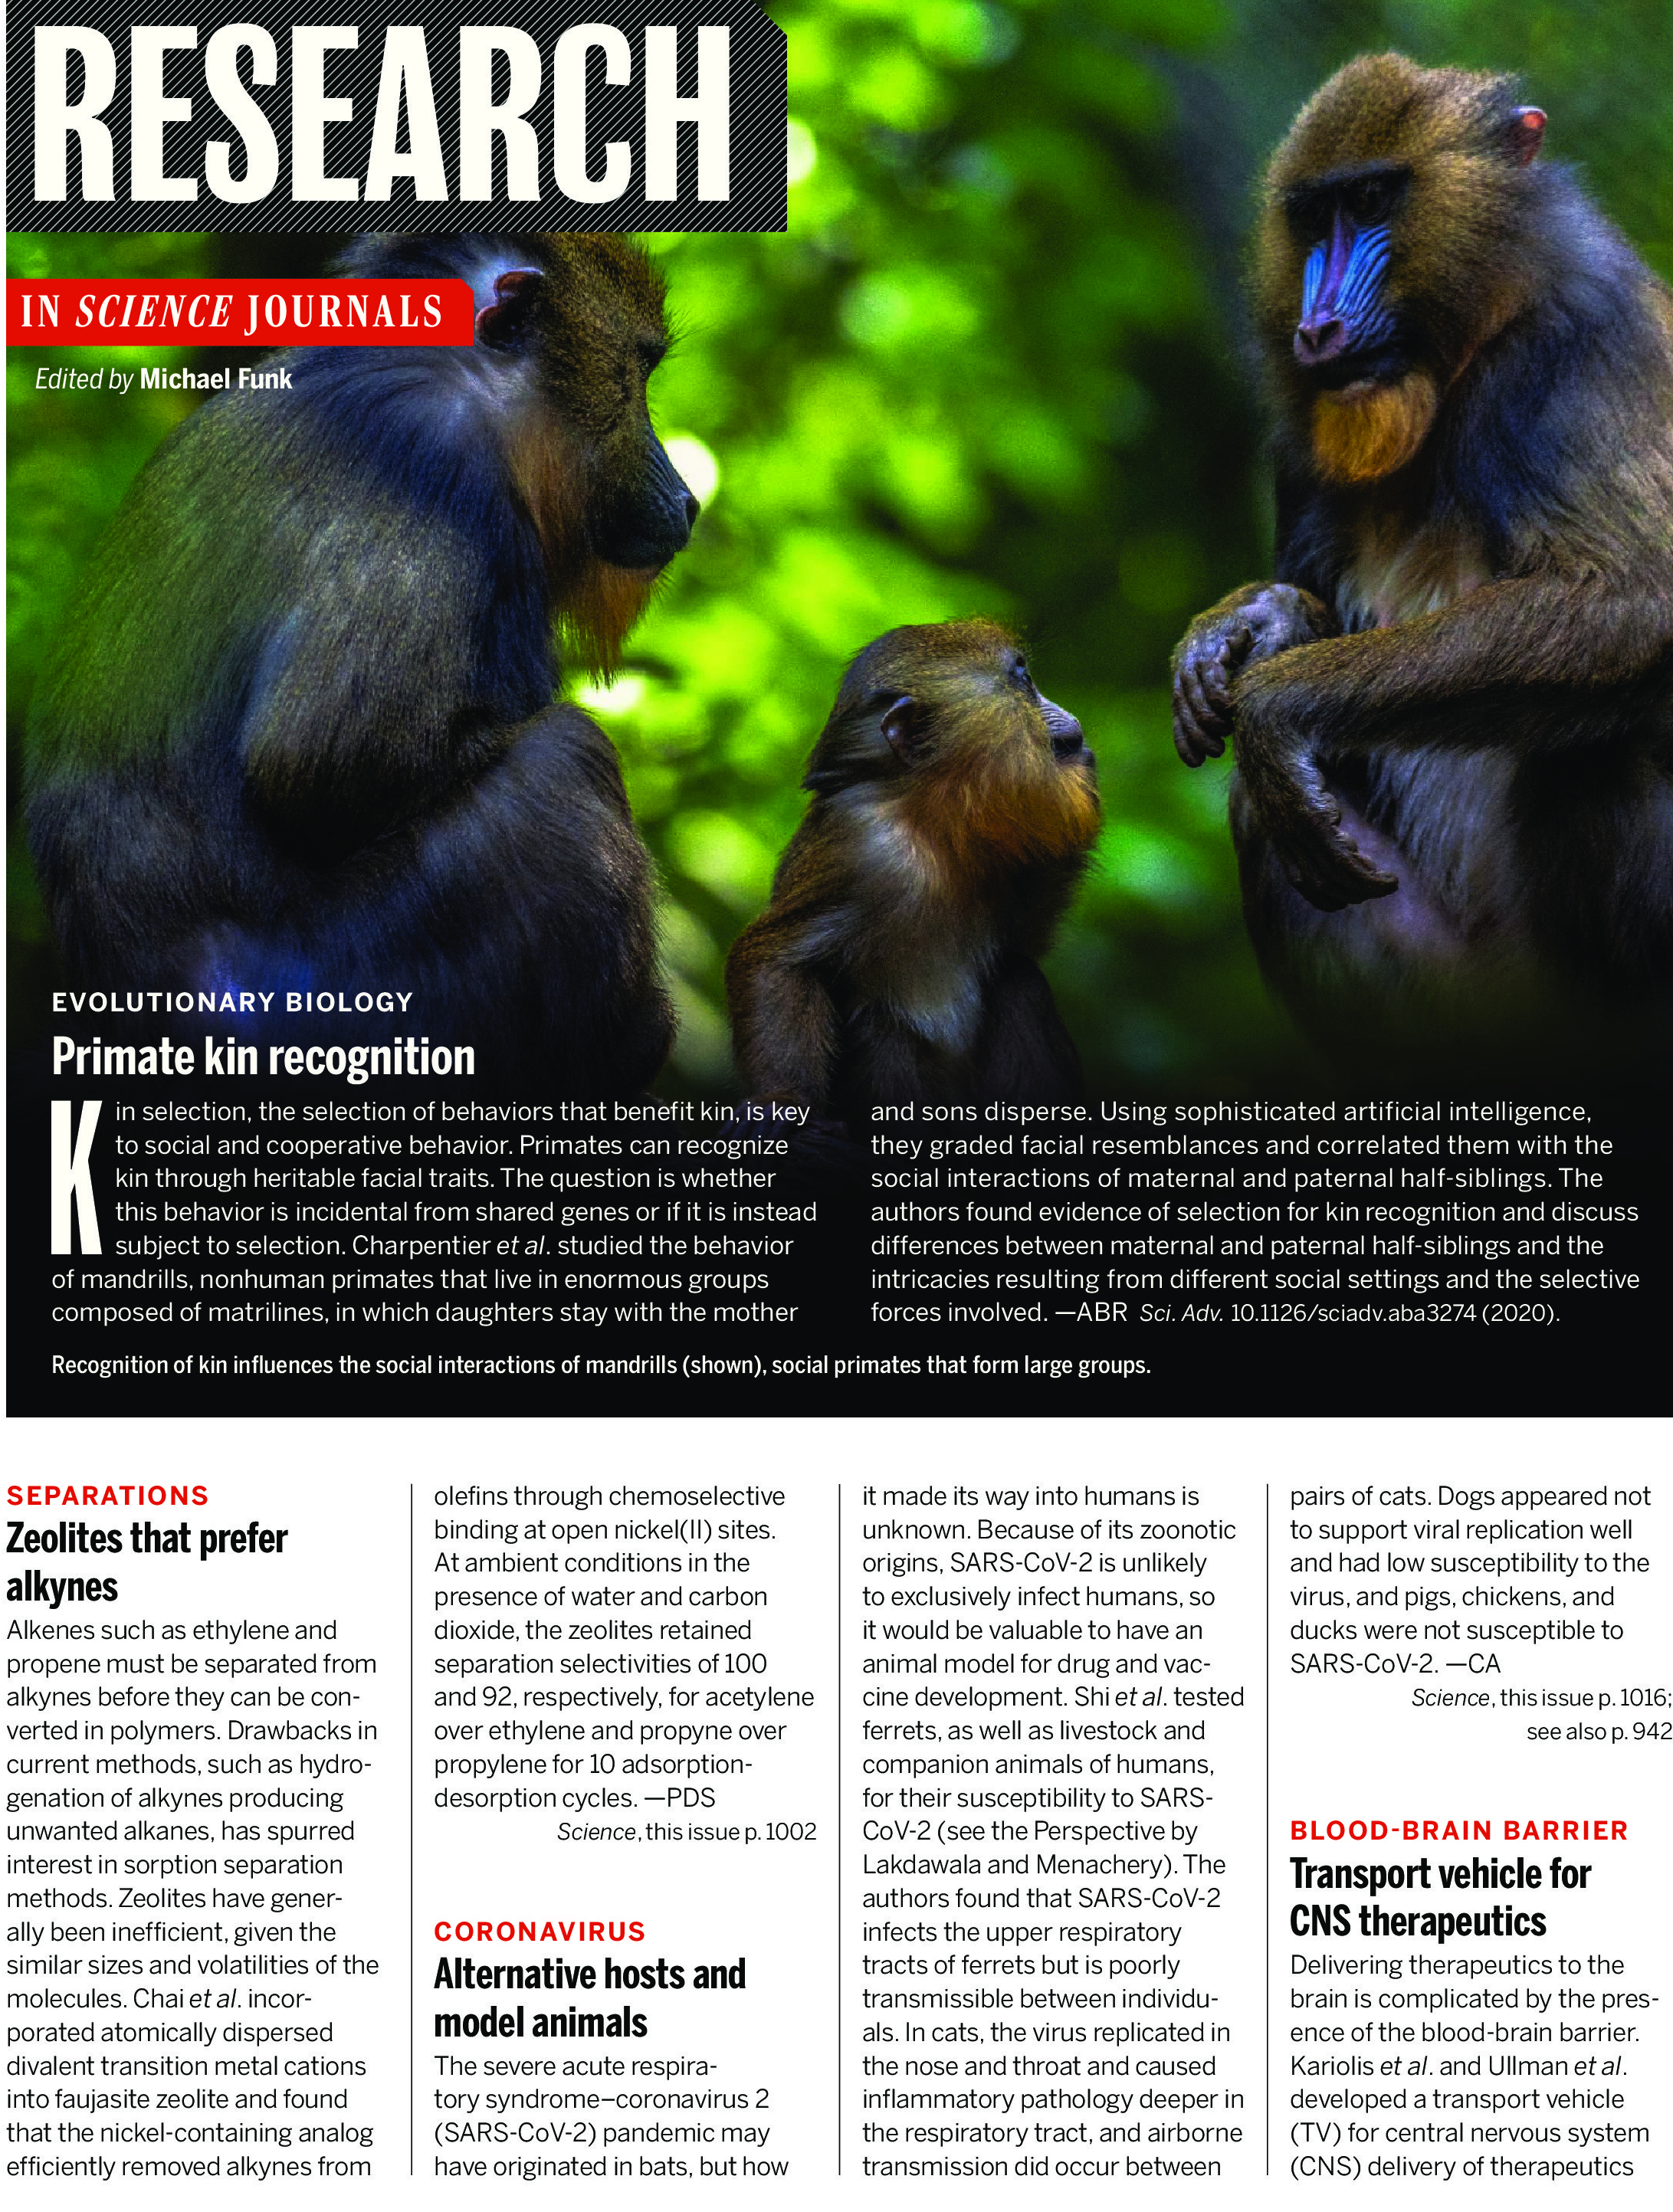 Science Magazine Research Highlights May 29 2020